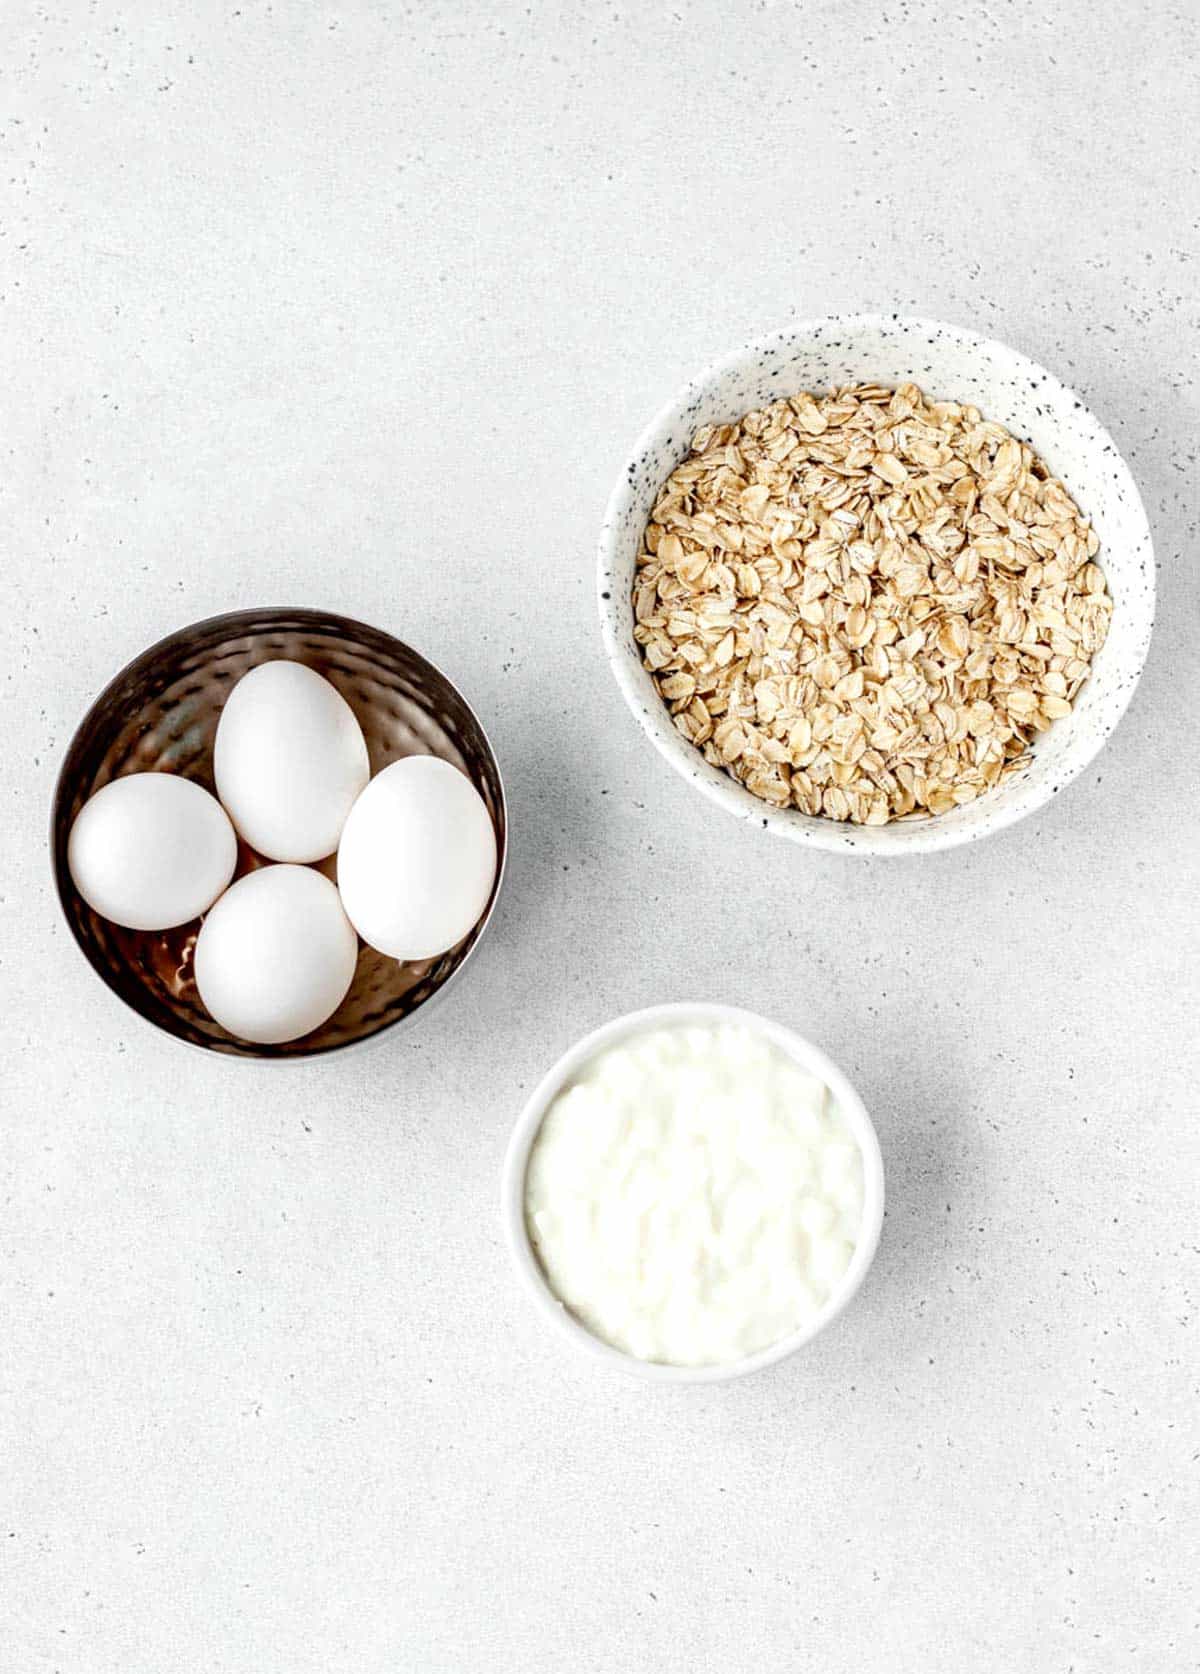 Ingredients for 3 ingredient protein waffles, including 4 eggs, cottage cheese and rolled oats.